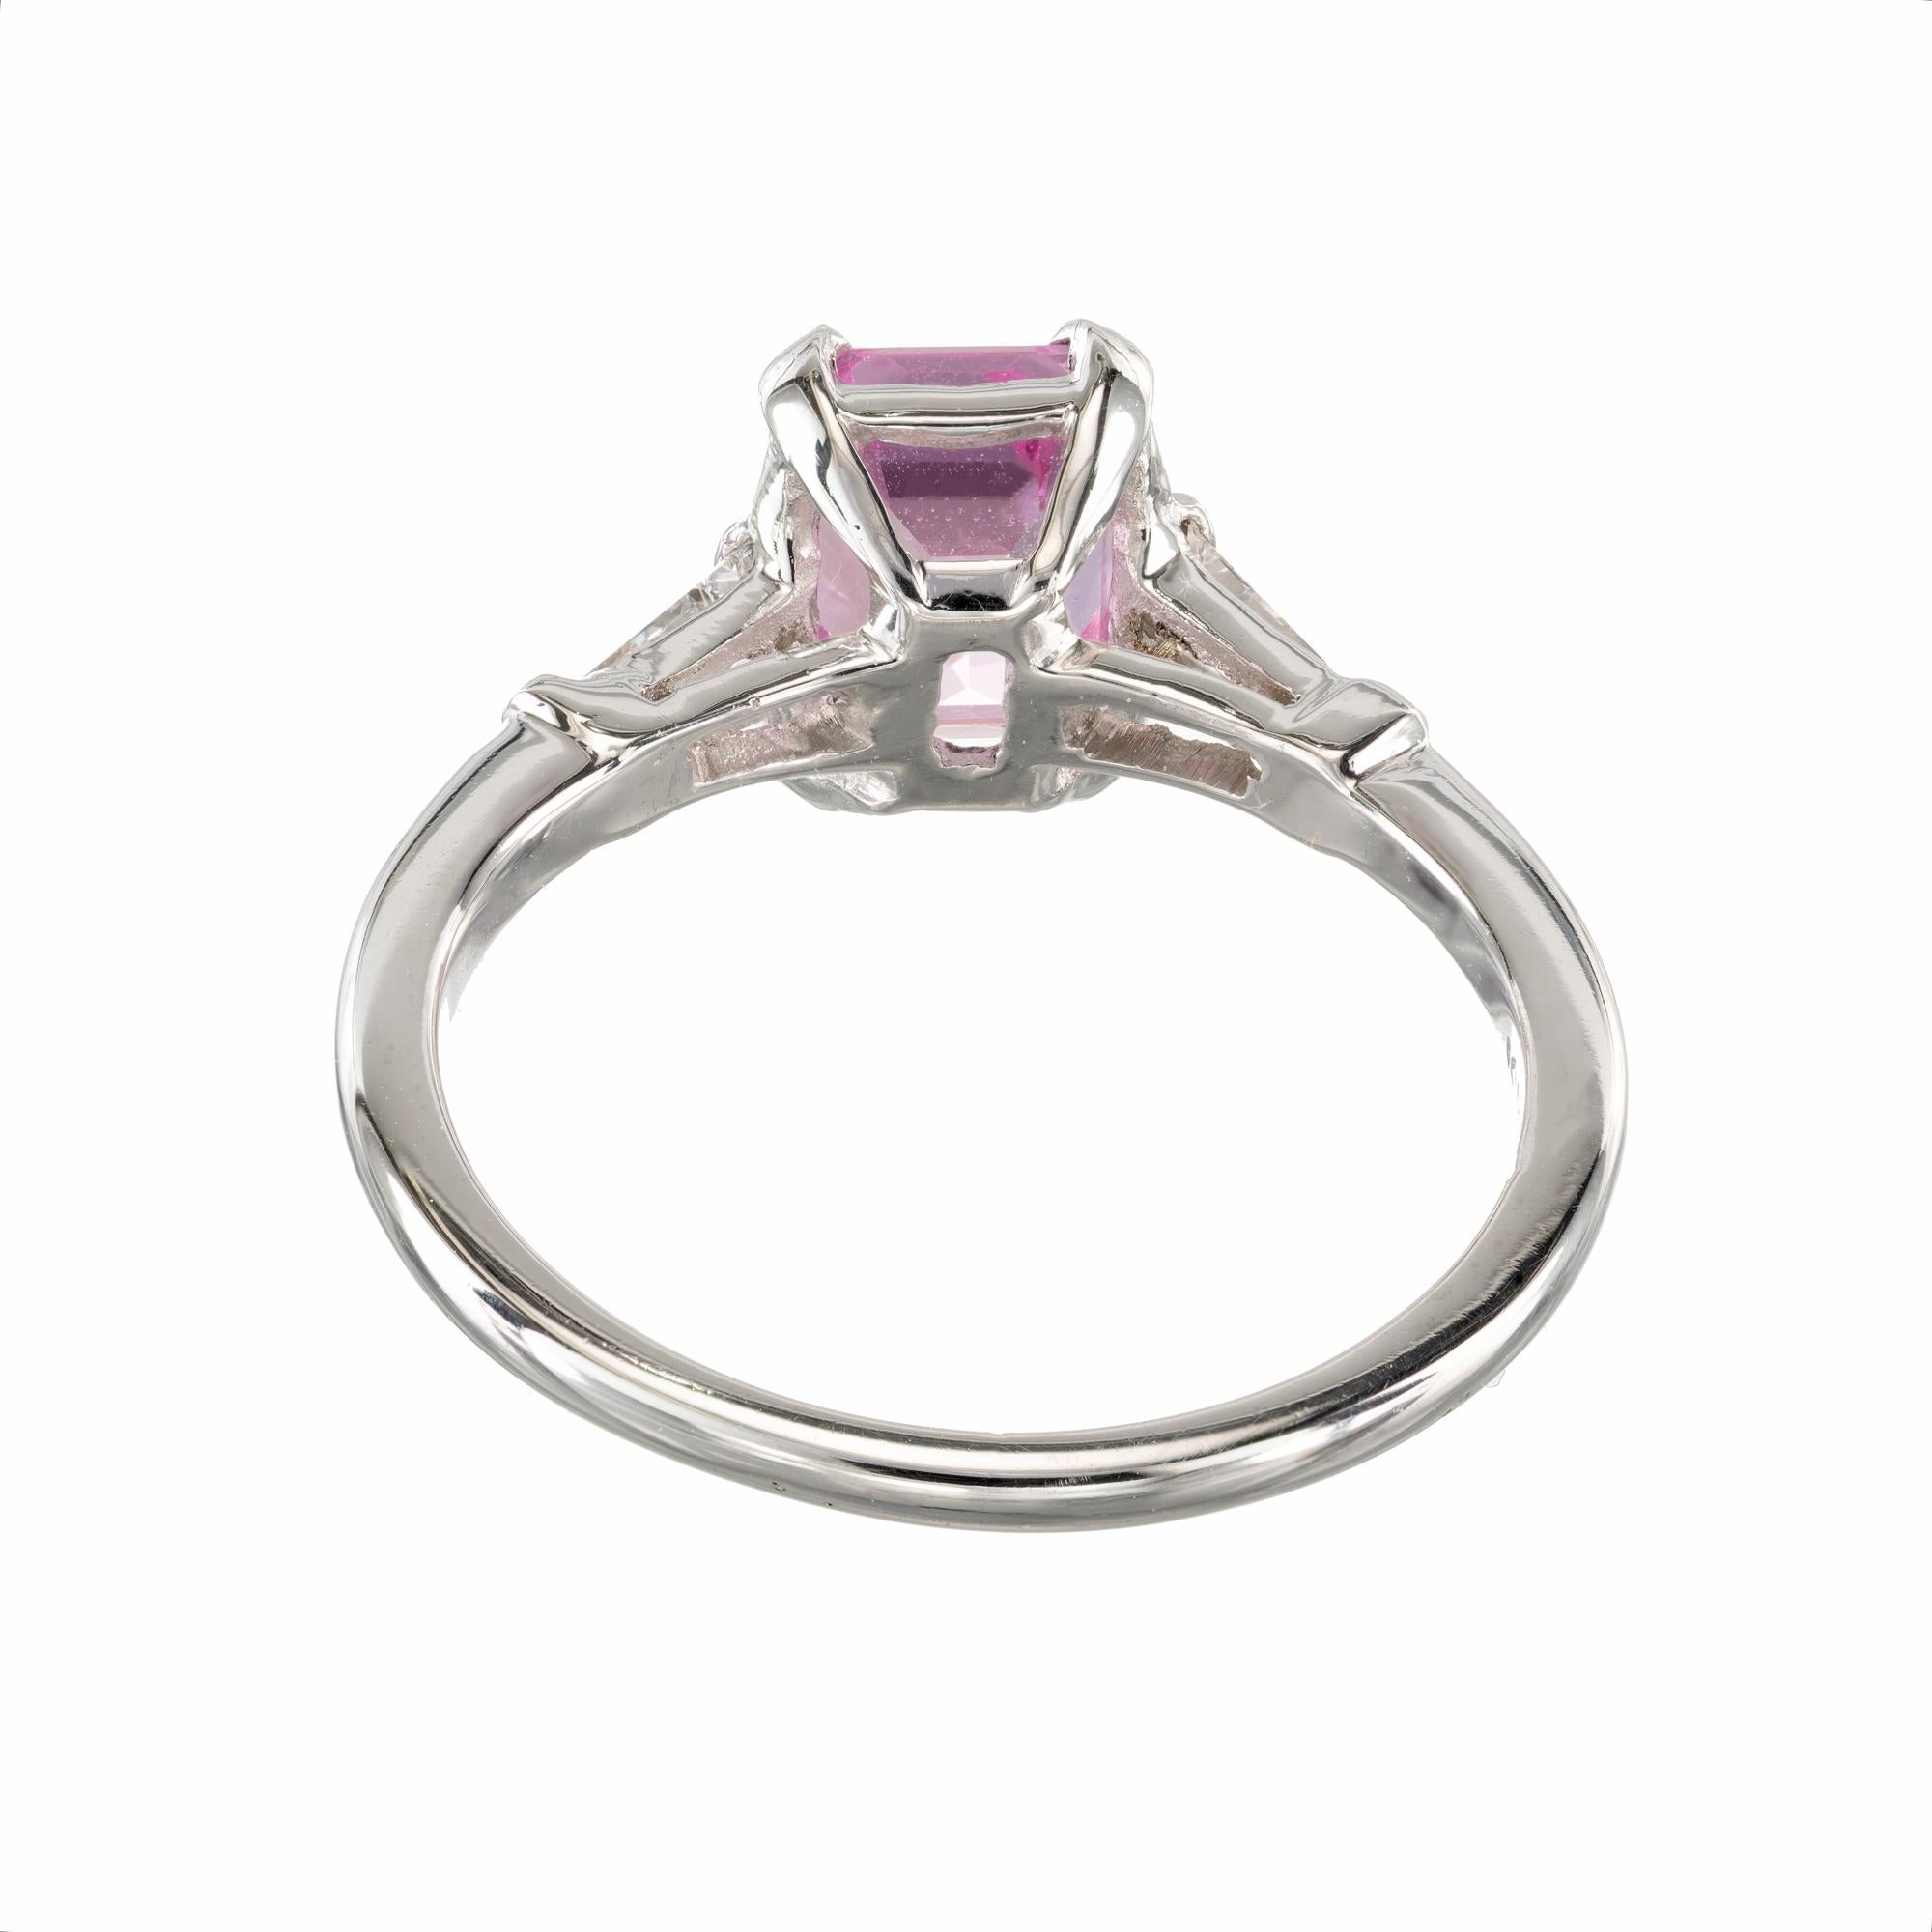 Women's GIA Certified 1.82 Carat Pink Sapphire Diamond Platinum Engagement Ring For Sale